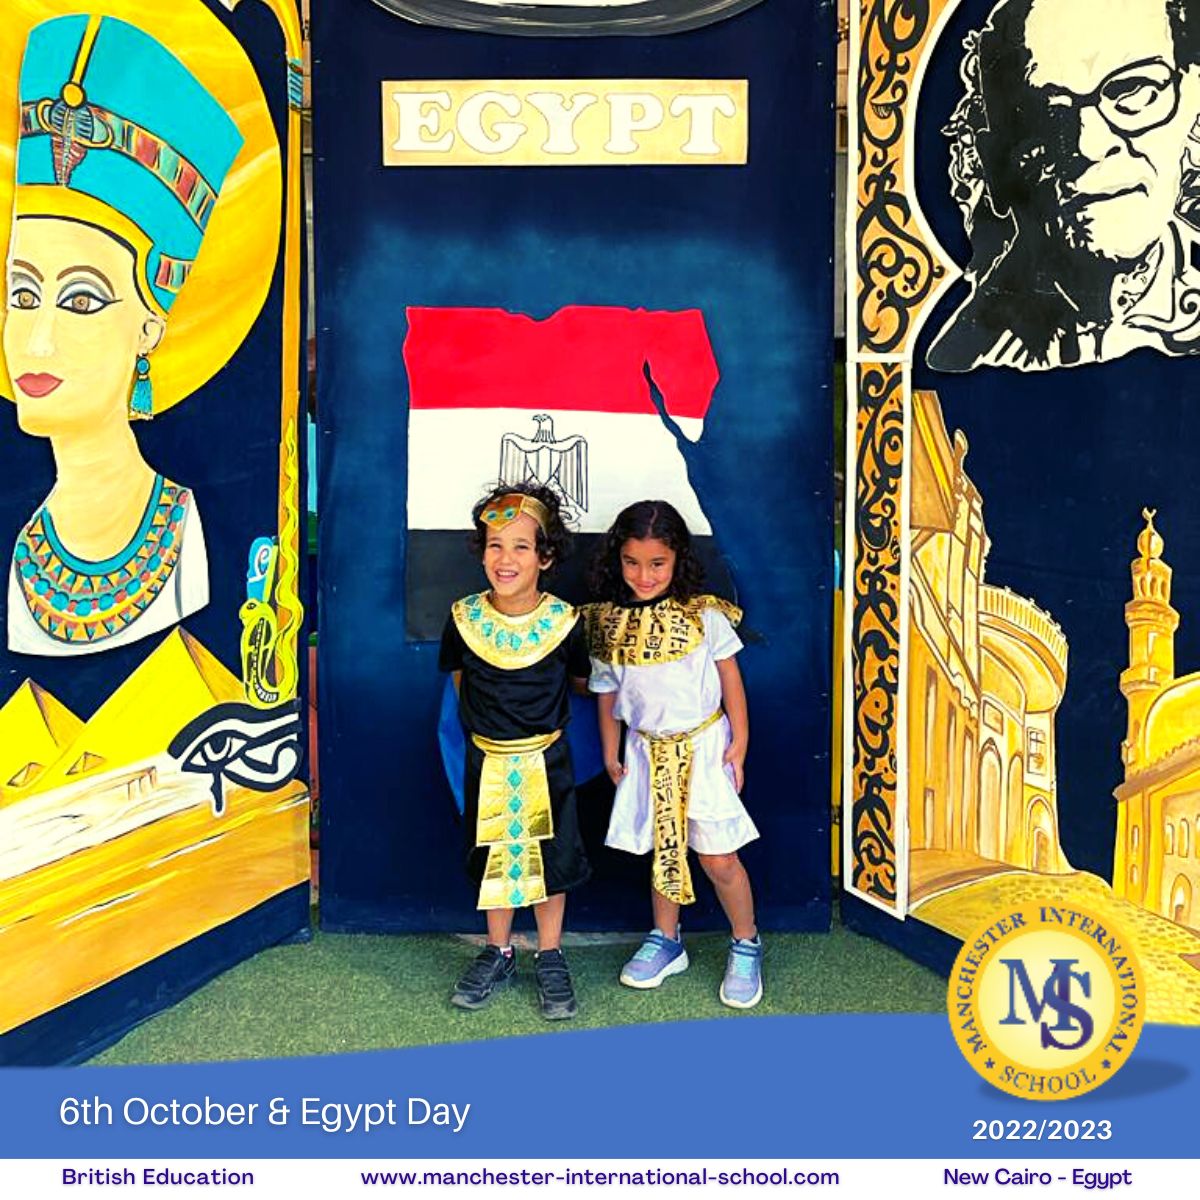 6th October & Egypt Day